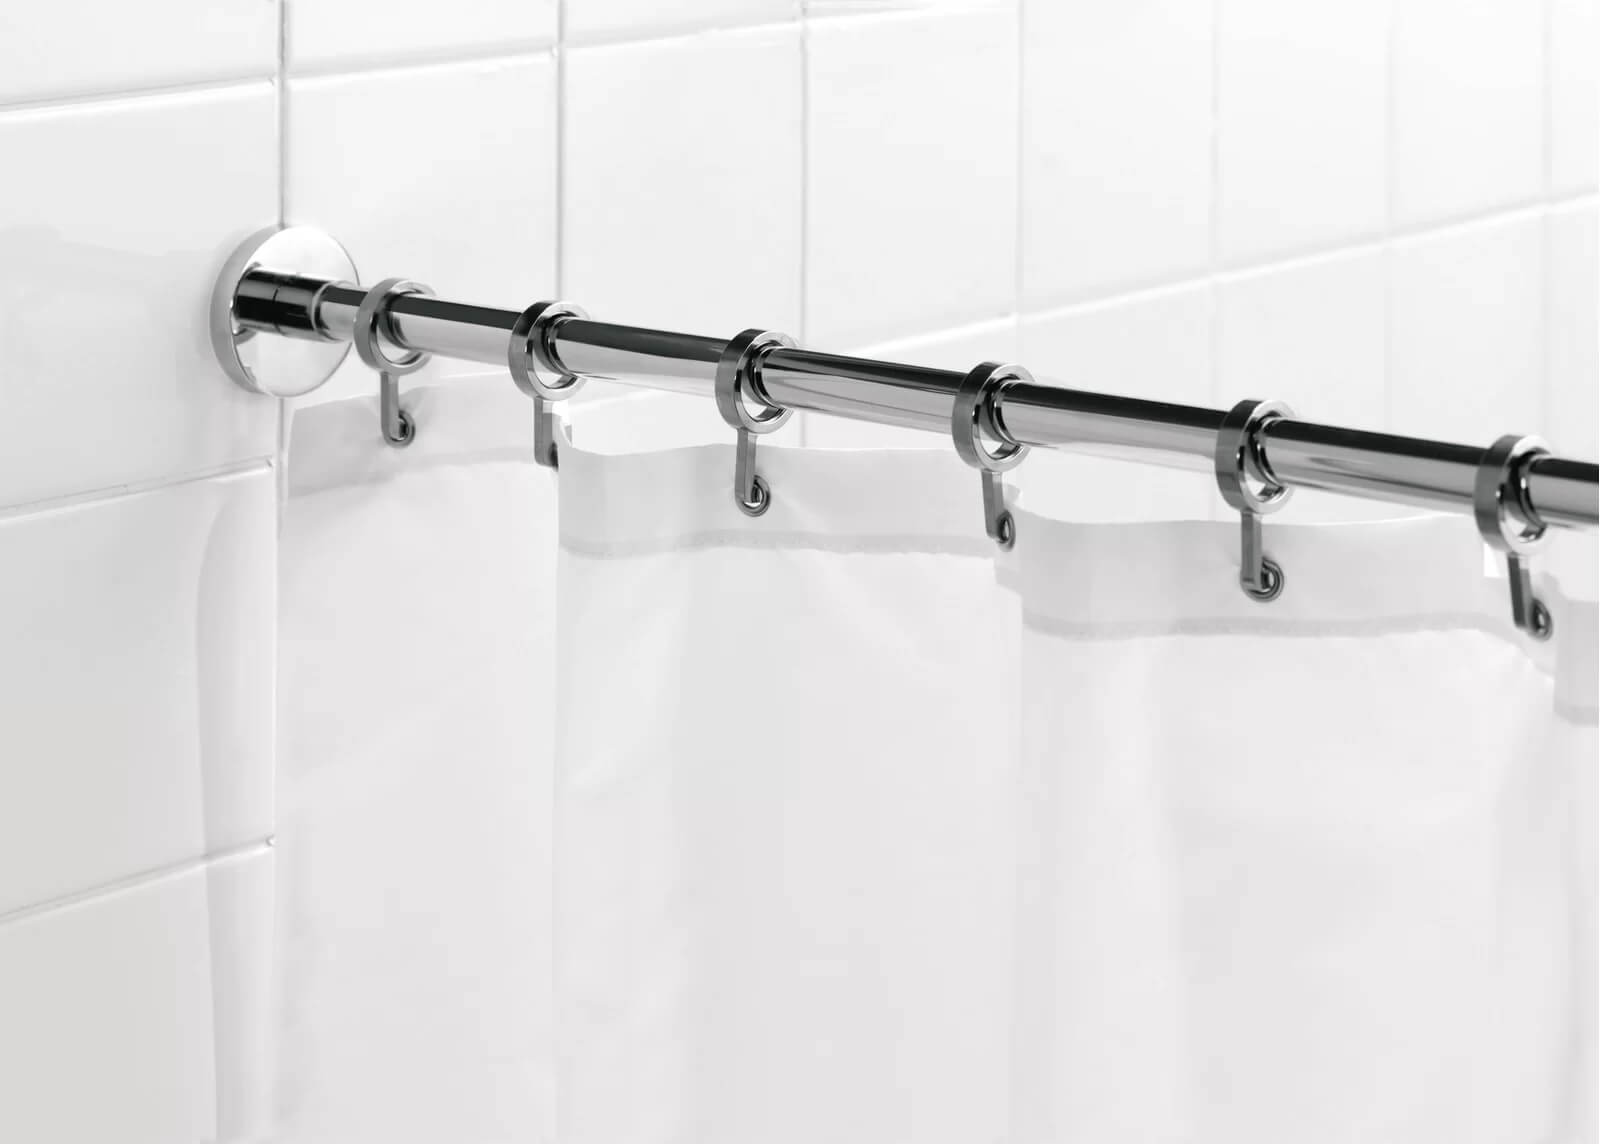 CHROME L SHAPED SHOWER RAIL ROD 80 x 80cm Courier Delivery Curtains At Home 